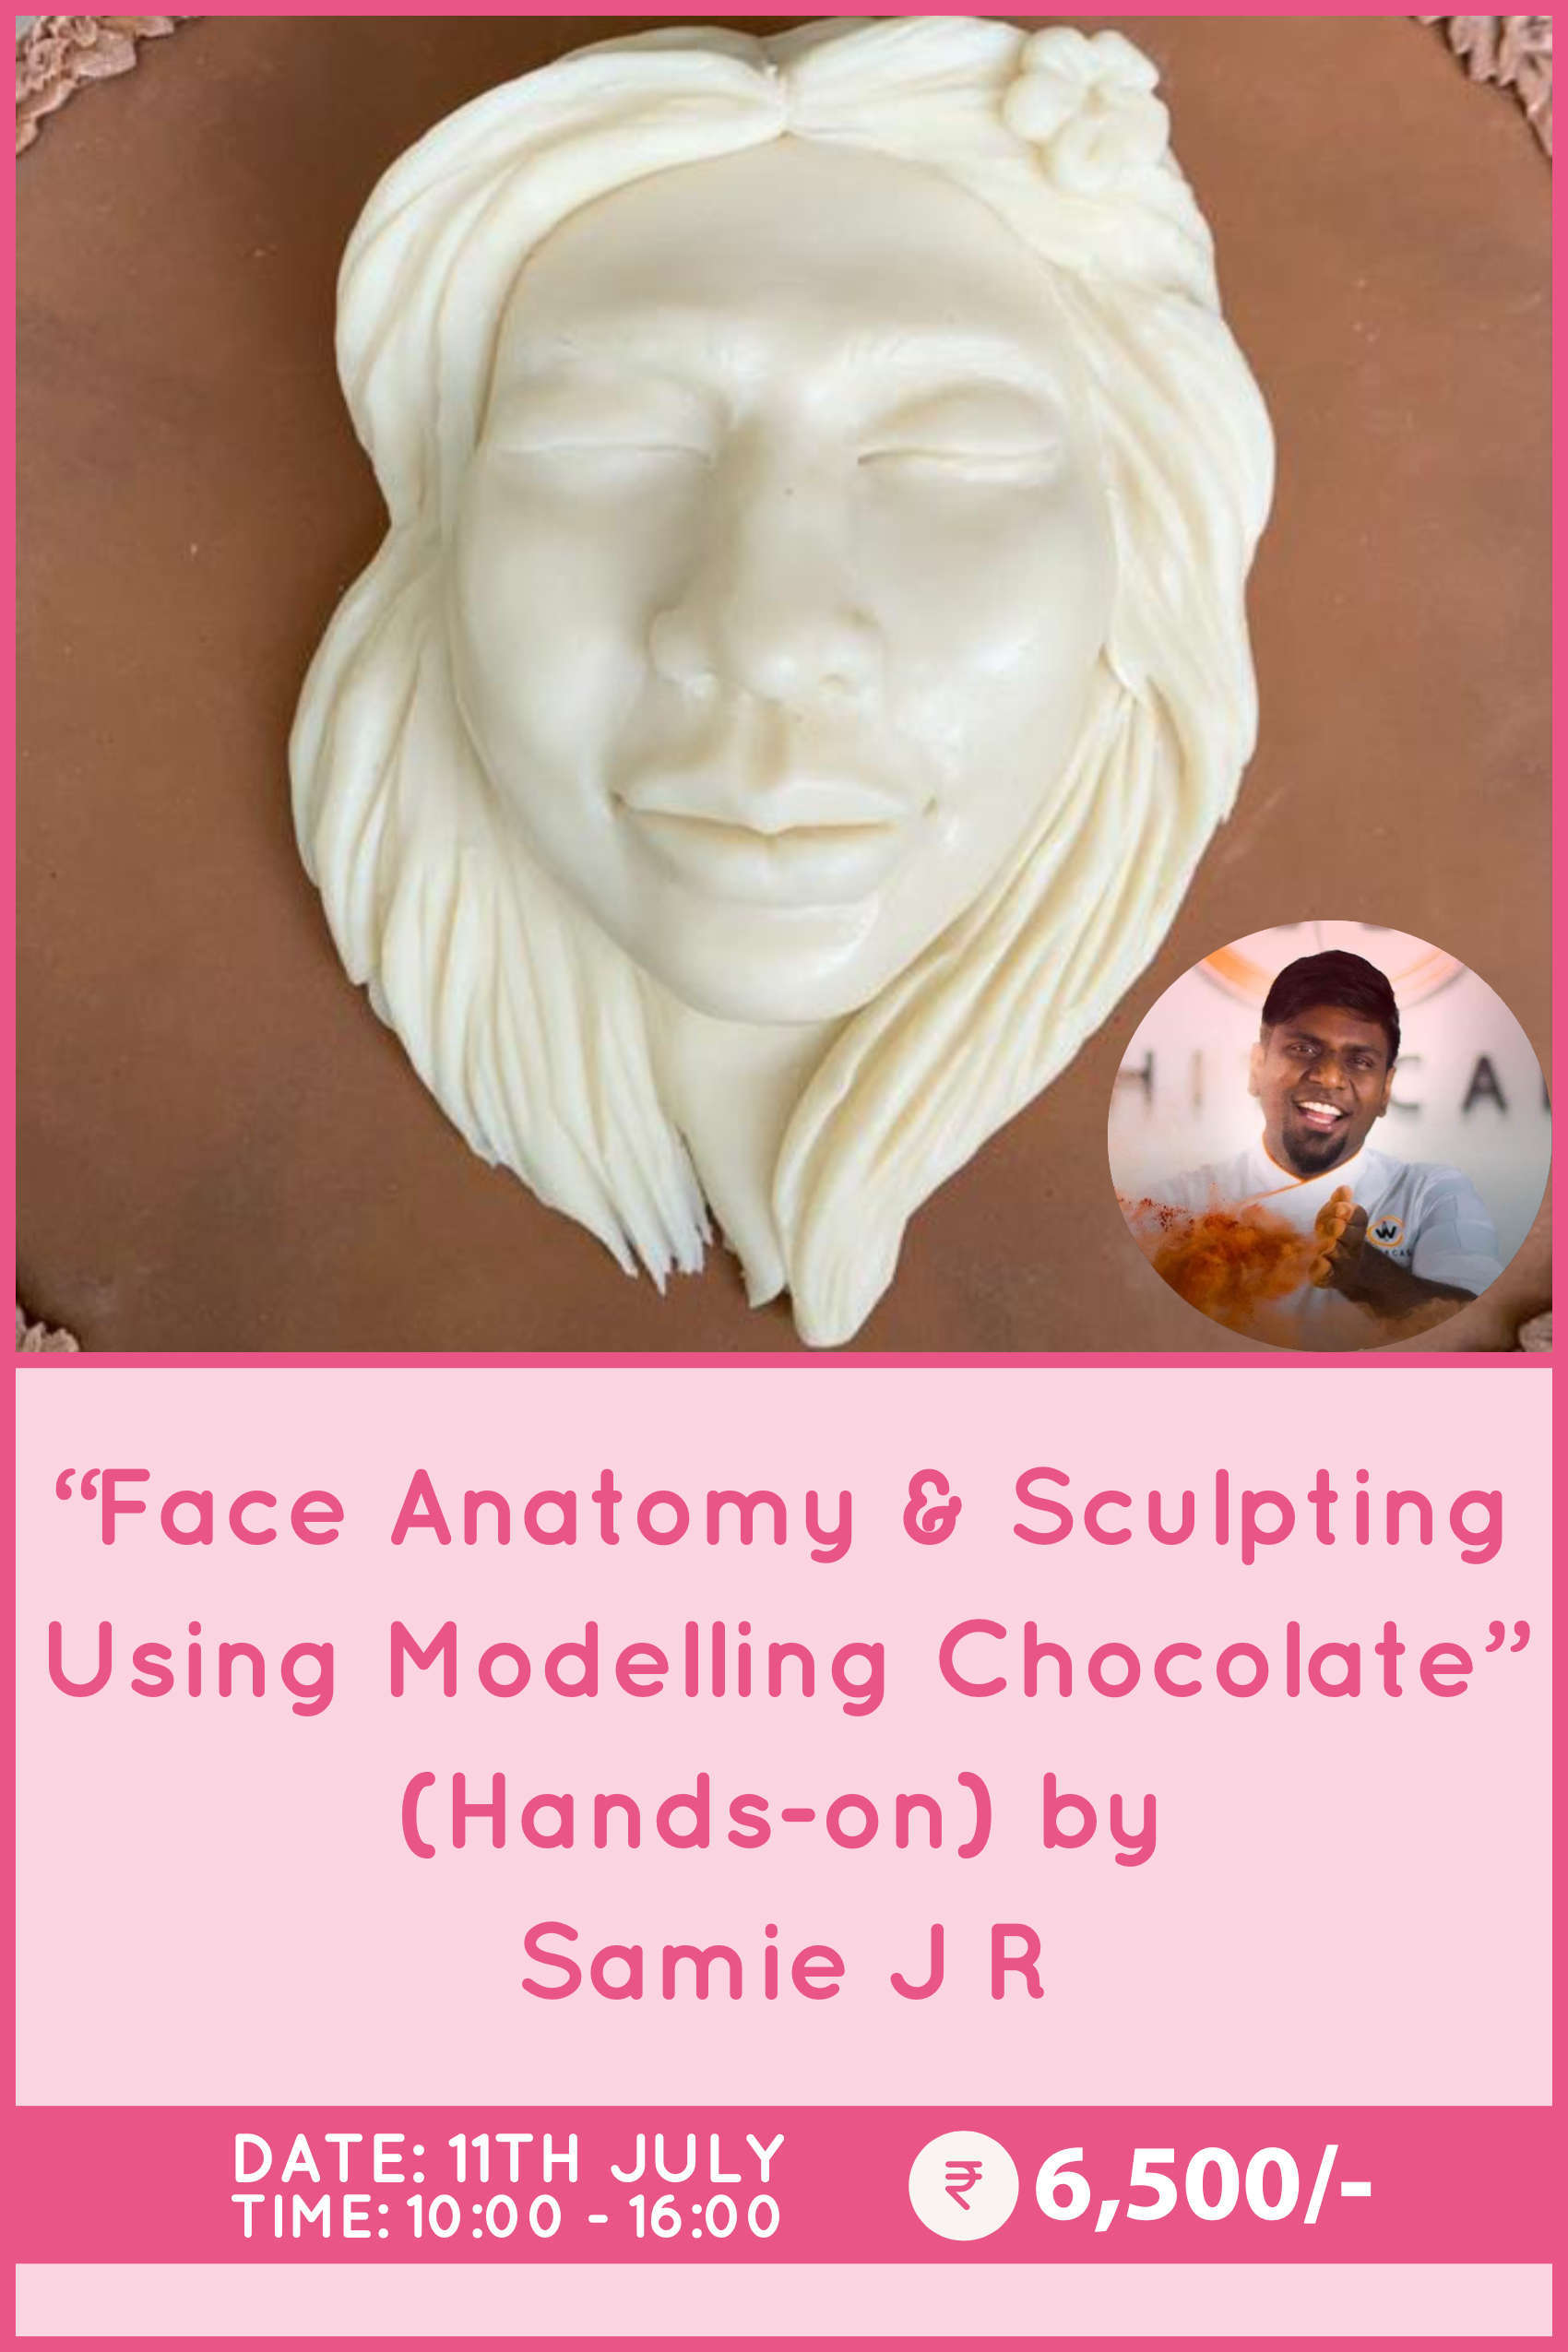 Face Anatomy & Sculpting using Modelling Chocolate by Samie J R